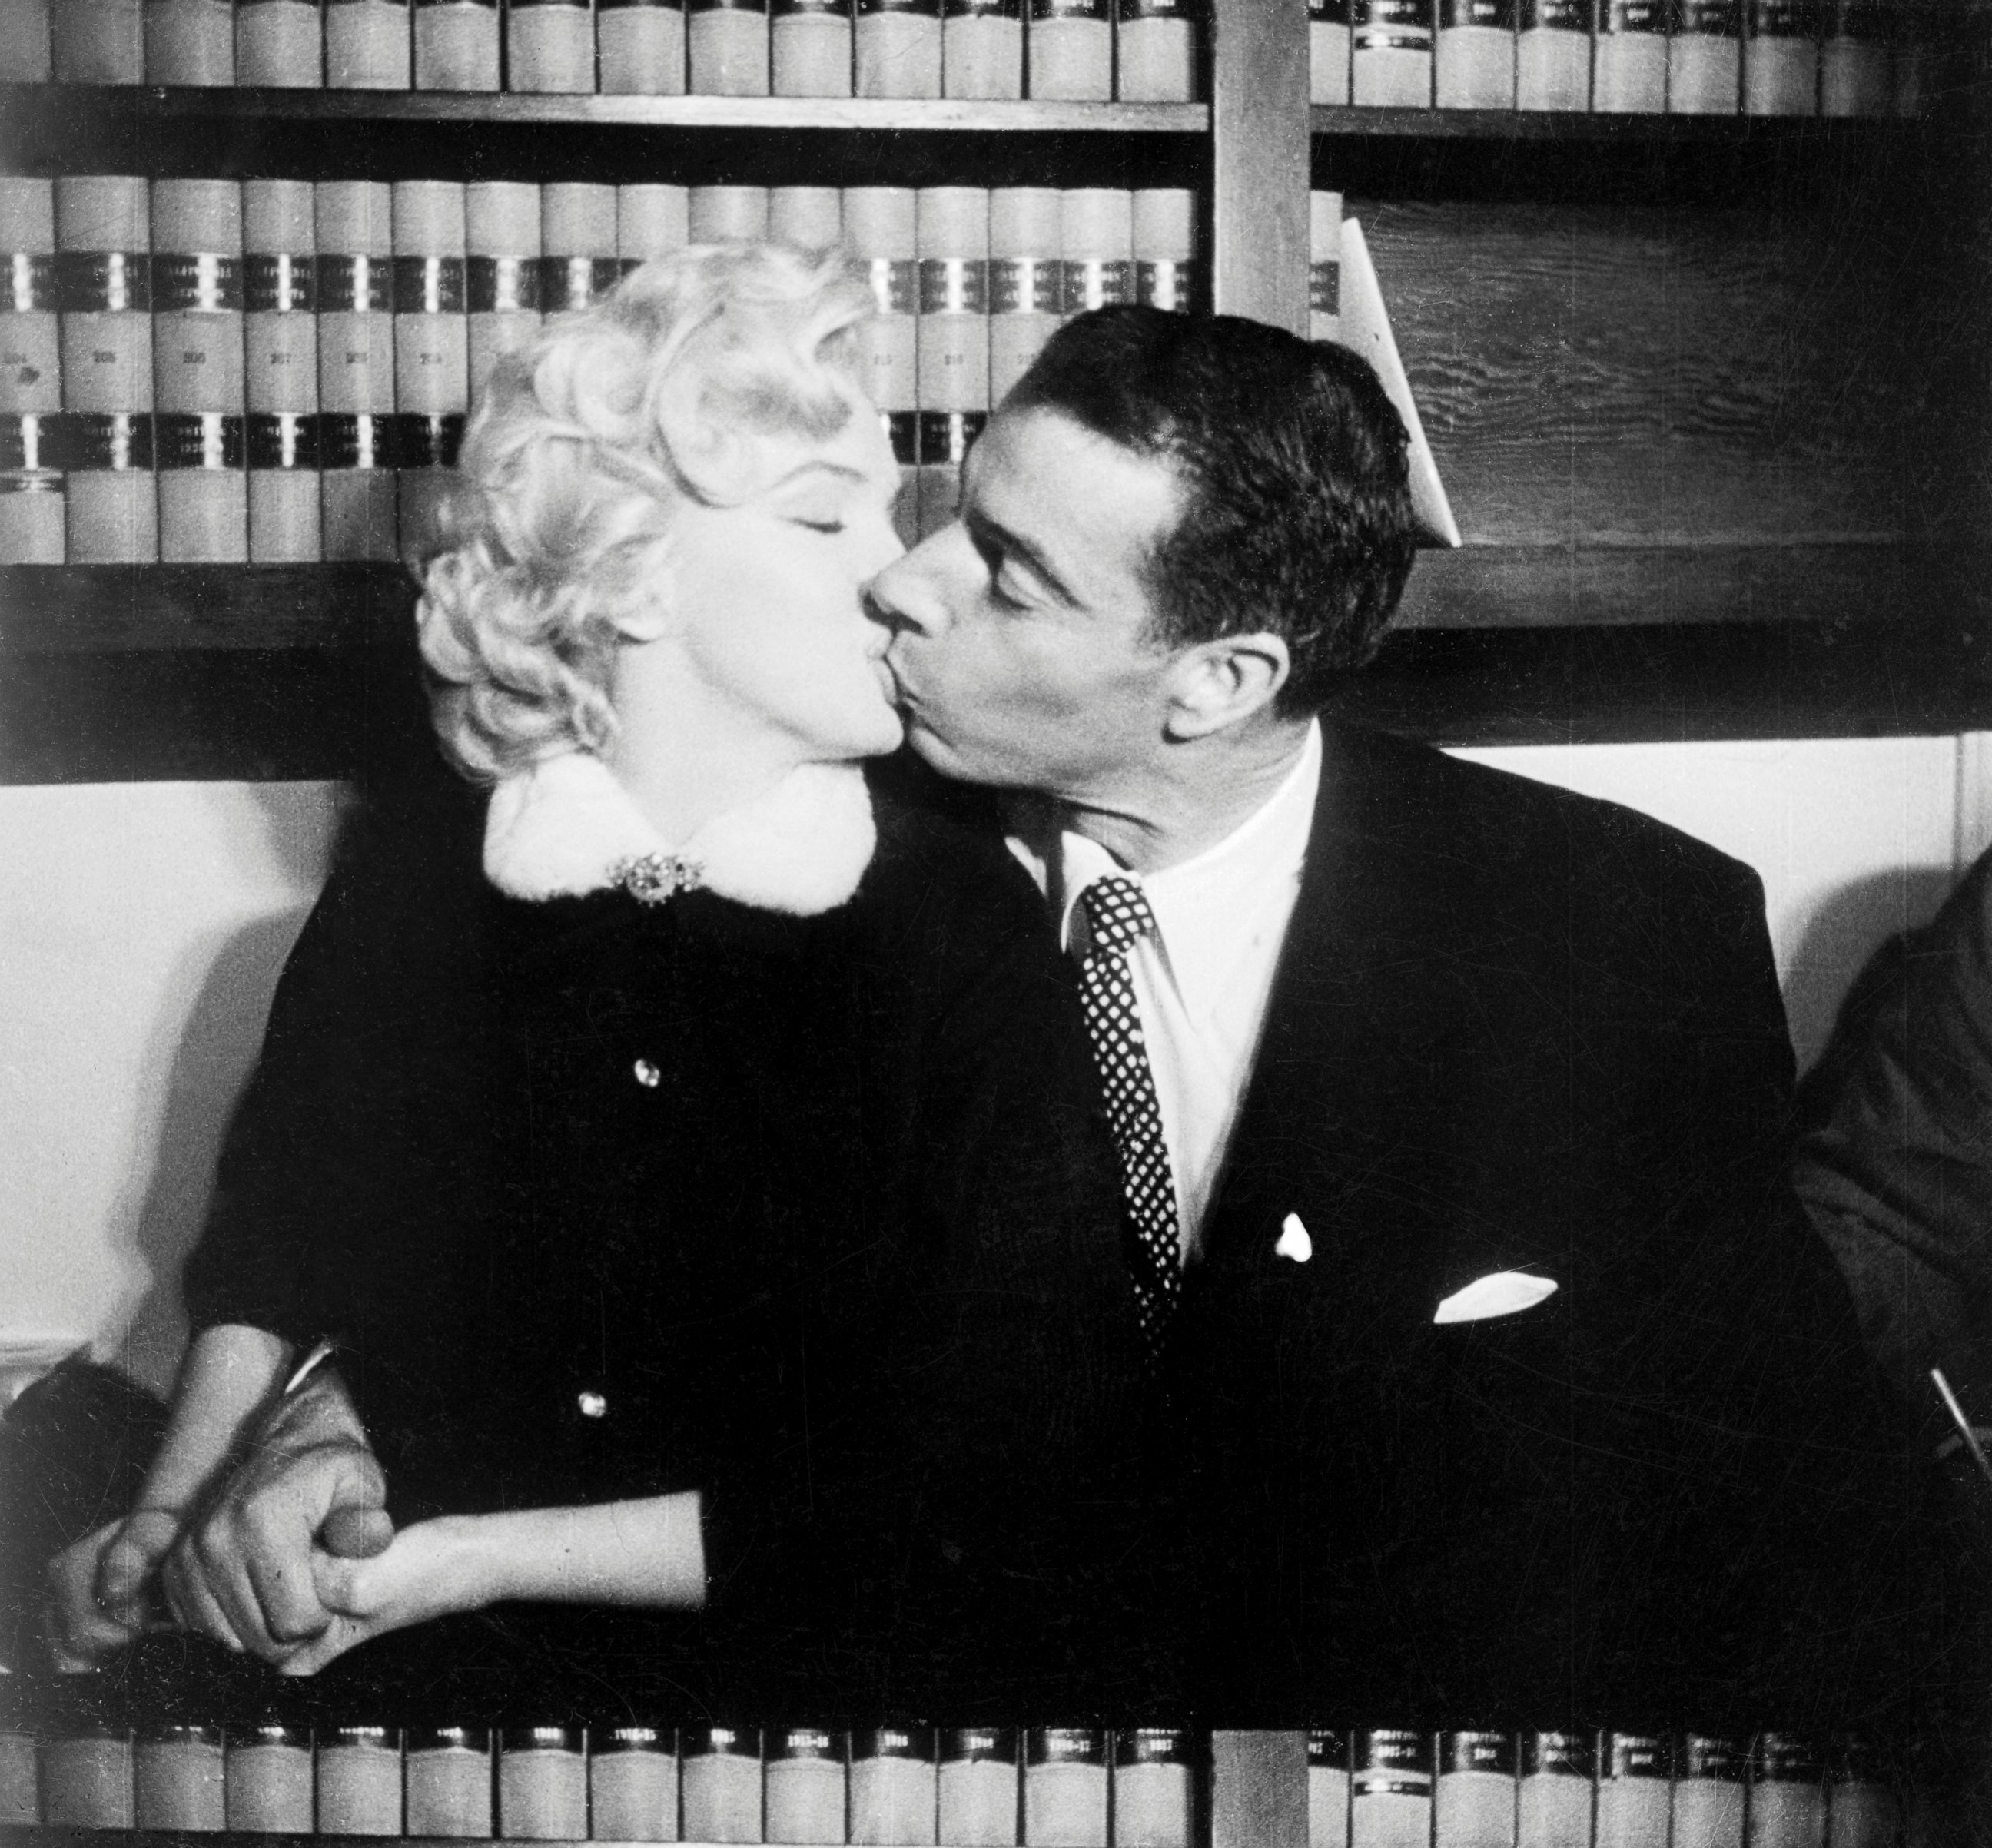 PHOTO: Marilyn Monroe and Joe DiMaggio kiss in the judge's chambers where they were married, Jan. 14, 1954.